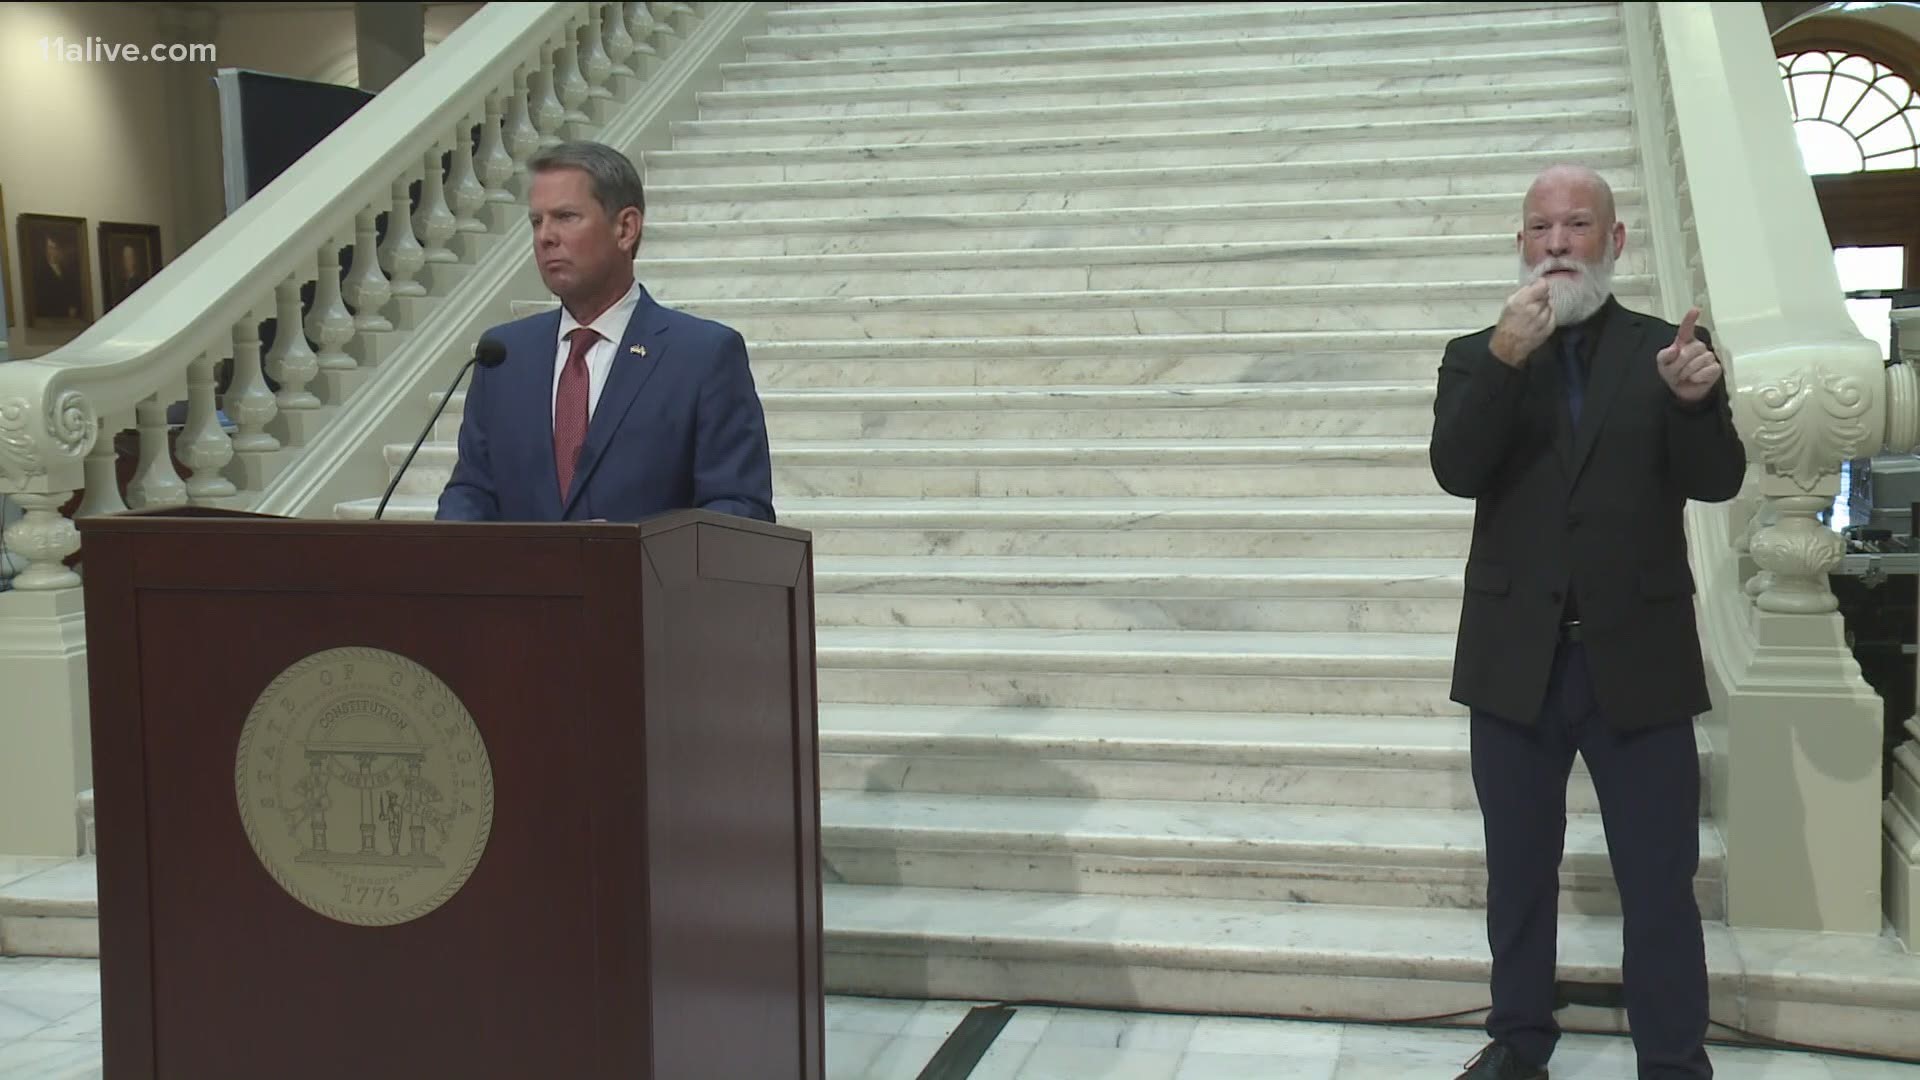 Gov. Kemp gave an update on the state's COVID-19 response in a press conference on Friday.